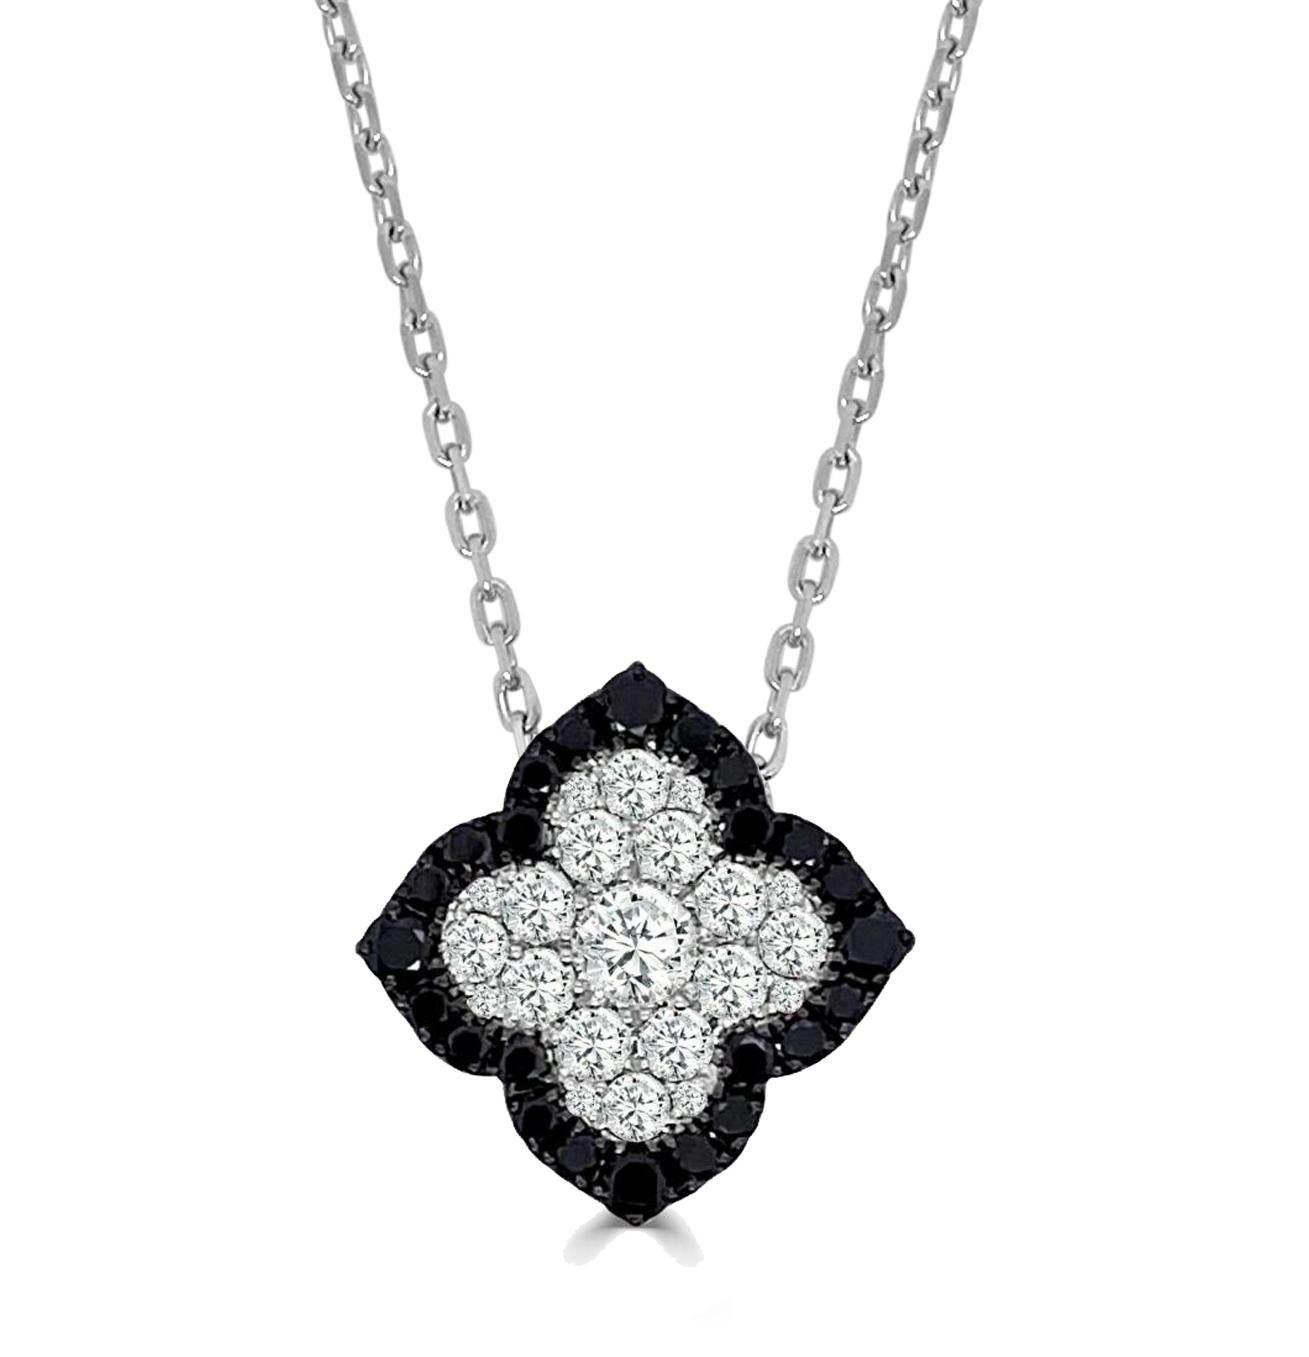 14K White Gold Large Fleur D’amour Black Diamond Outside & White Diamond Inside, Pendant With Hidden Bale & With Mini Paperclip Chain 24 BDIA 0.52, 21 DIA 0.62 CT, approx 16.5 mm

Available in other metal/ gemstone options: This Diamond pendant can